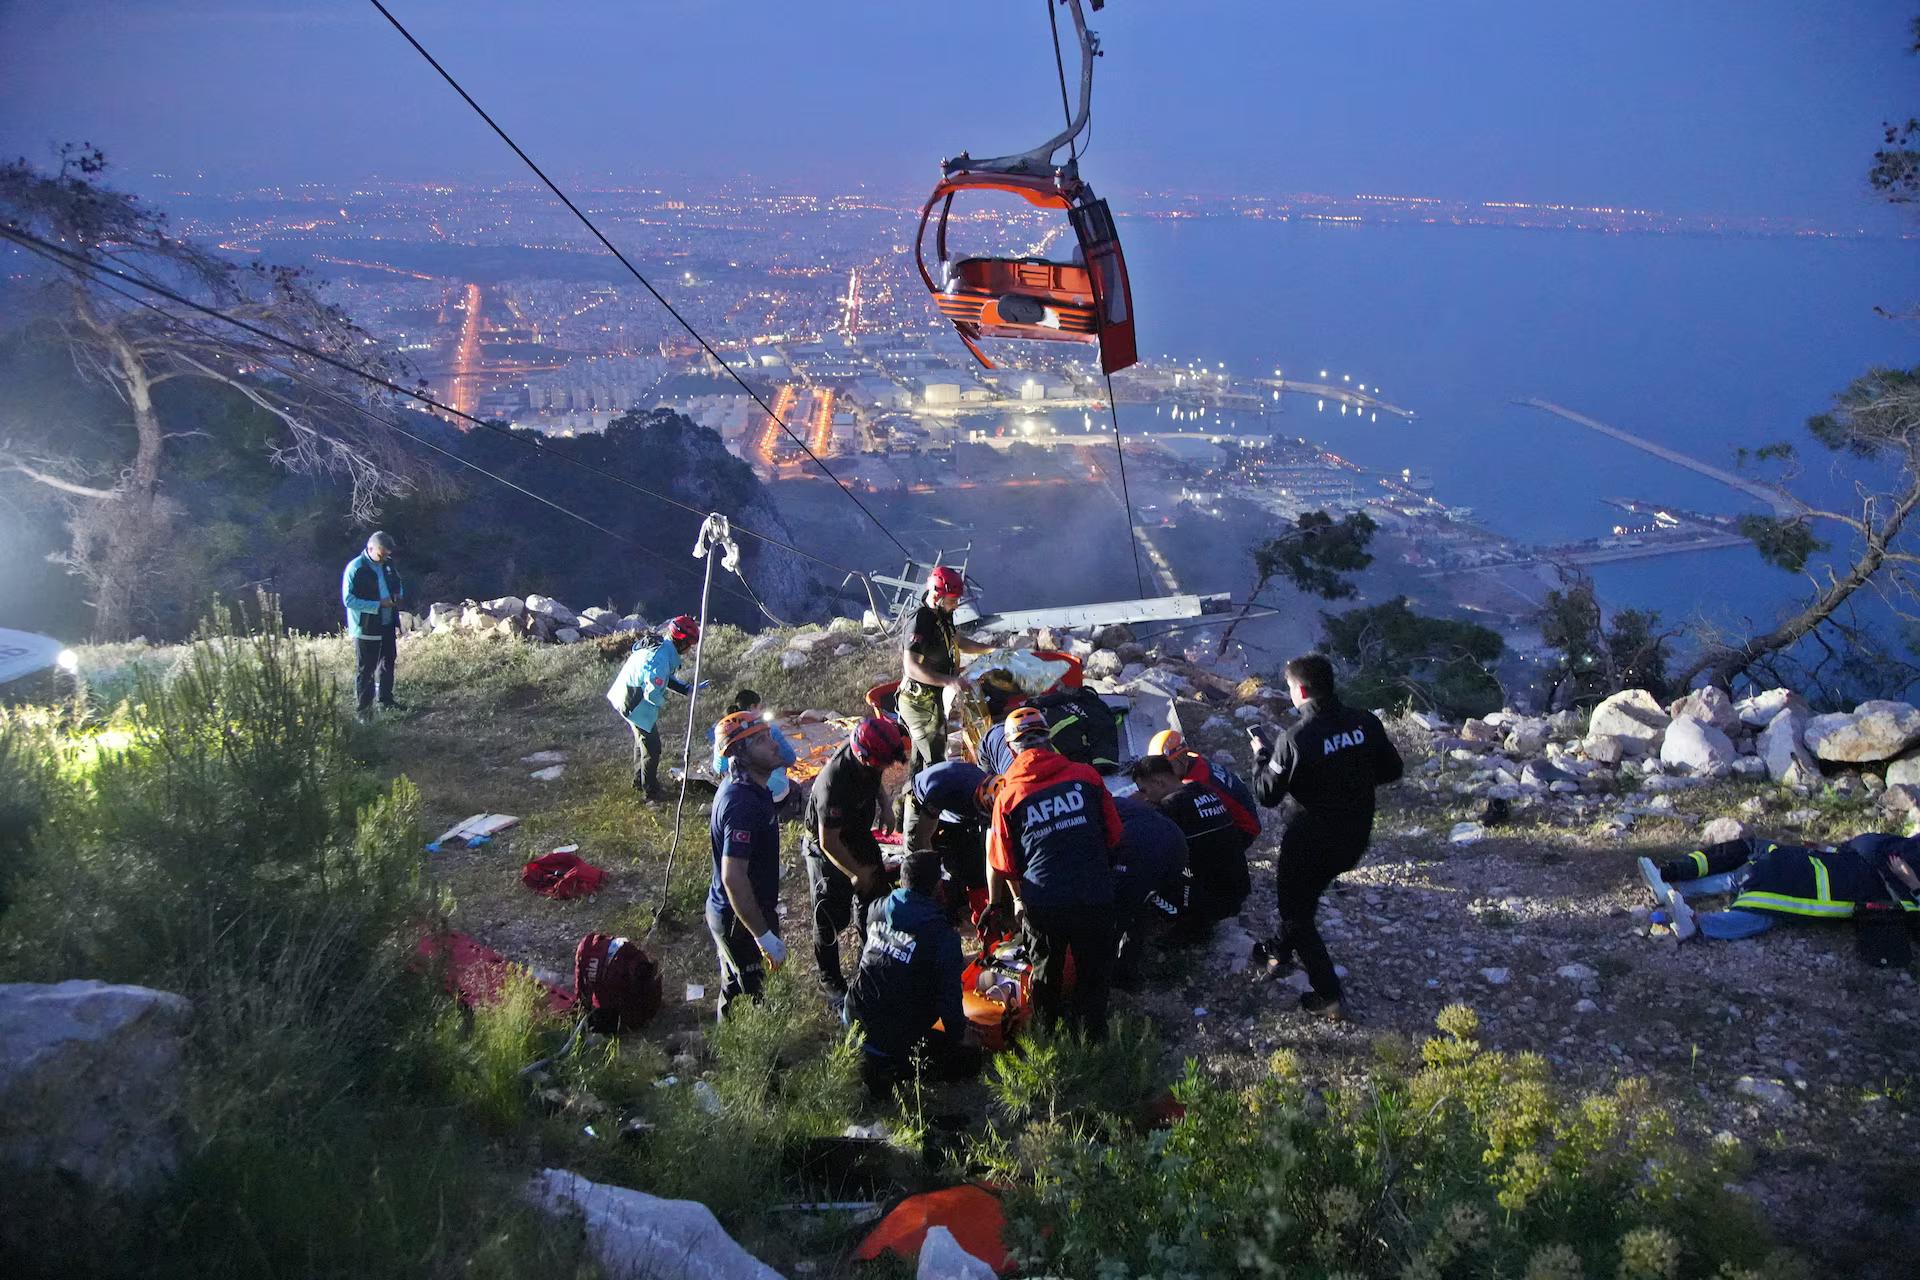 One killed, leaves many stranded in Turkey cable car crash